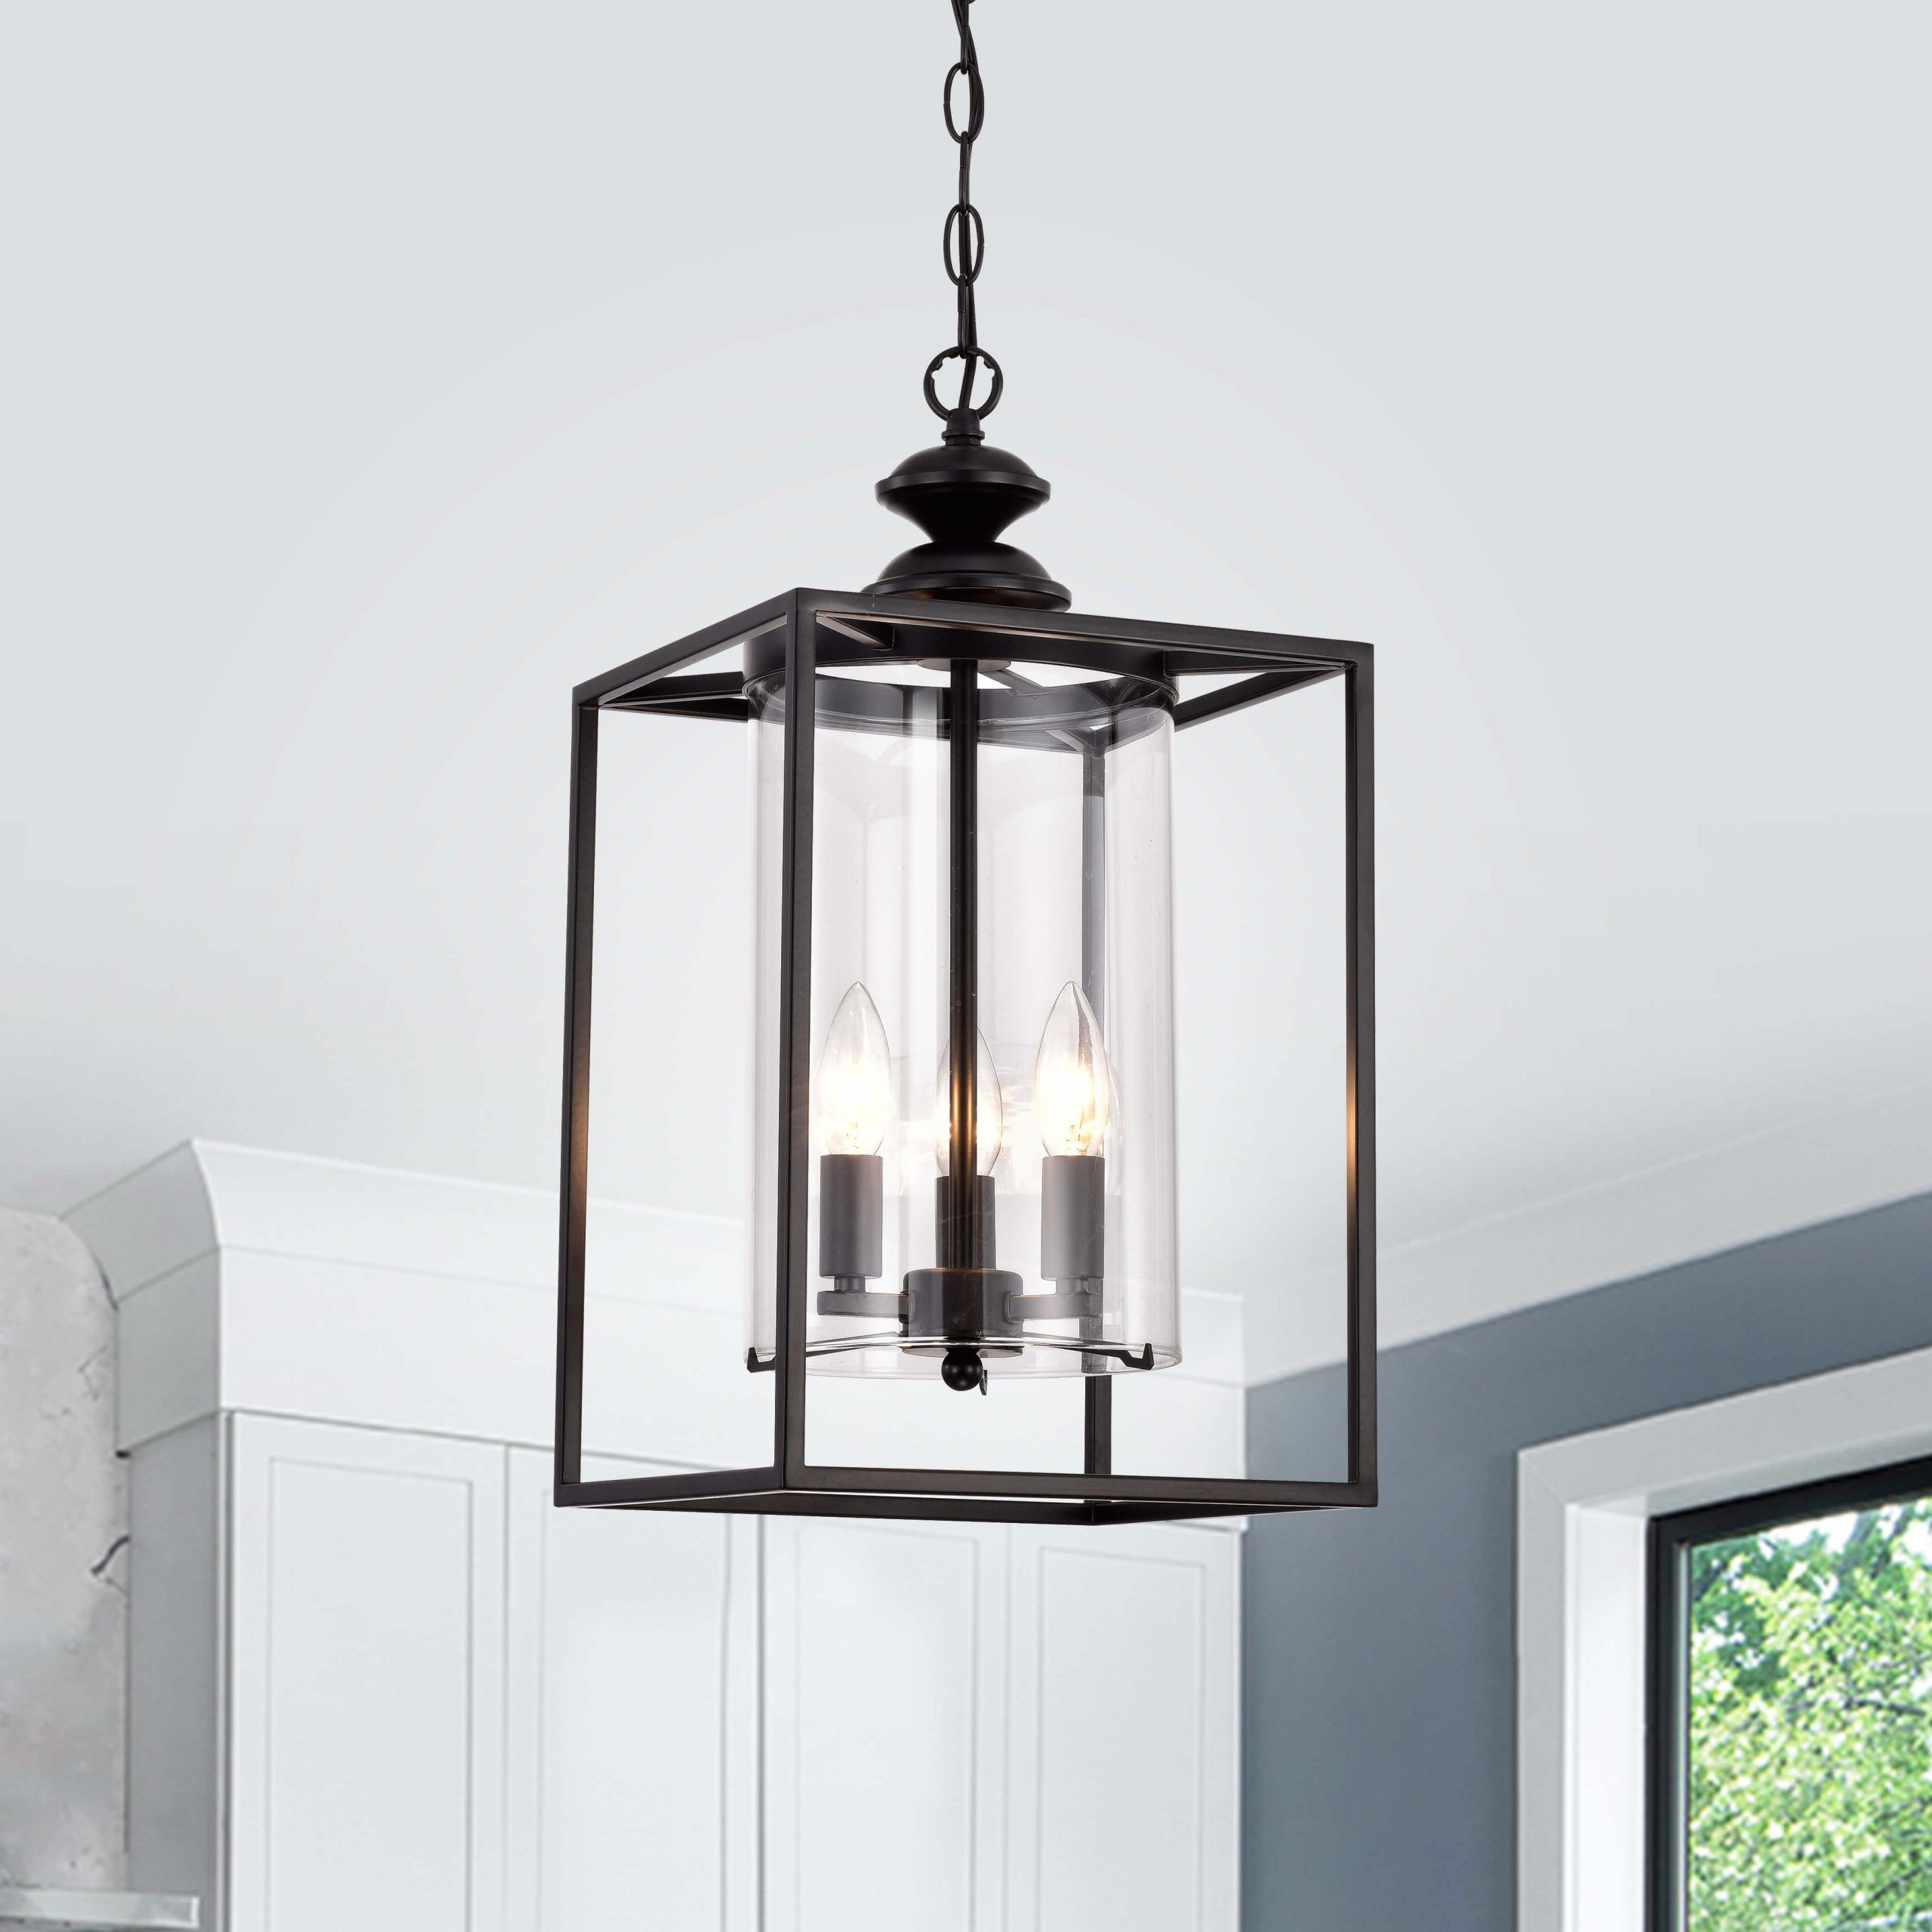 Marta Antique Black 3 Light Glass And Metal Lantern Pendant Chandelier – On  Sale – Overstock – 33590609 Intended For Favorite Black Iron Lantern Chandeliers (View 6 of 15)